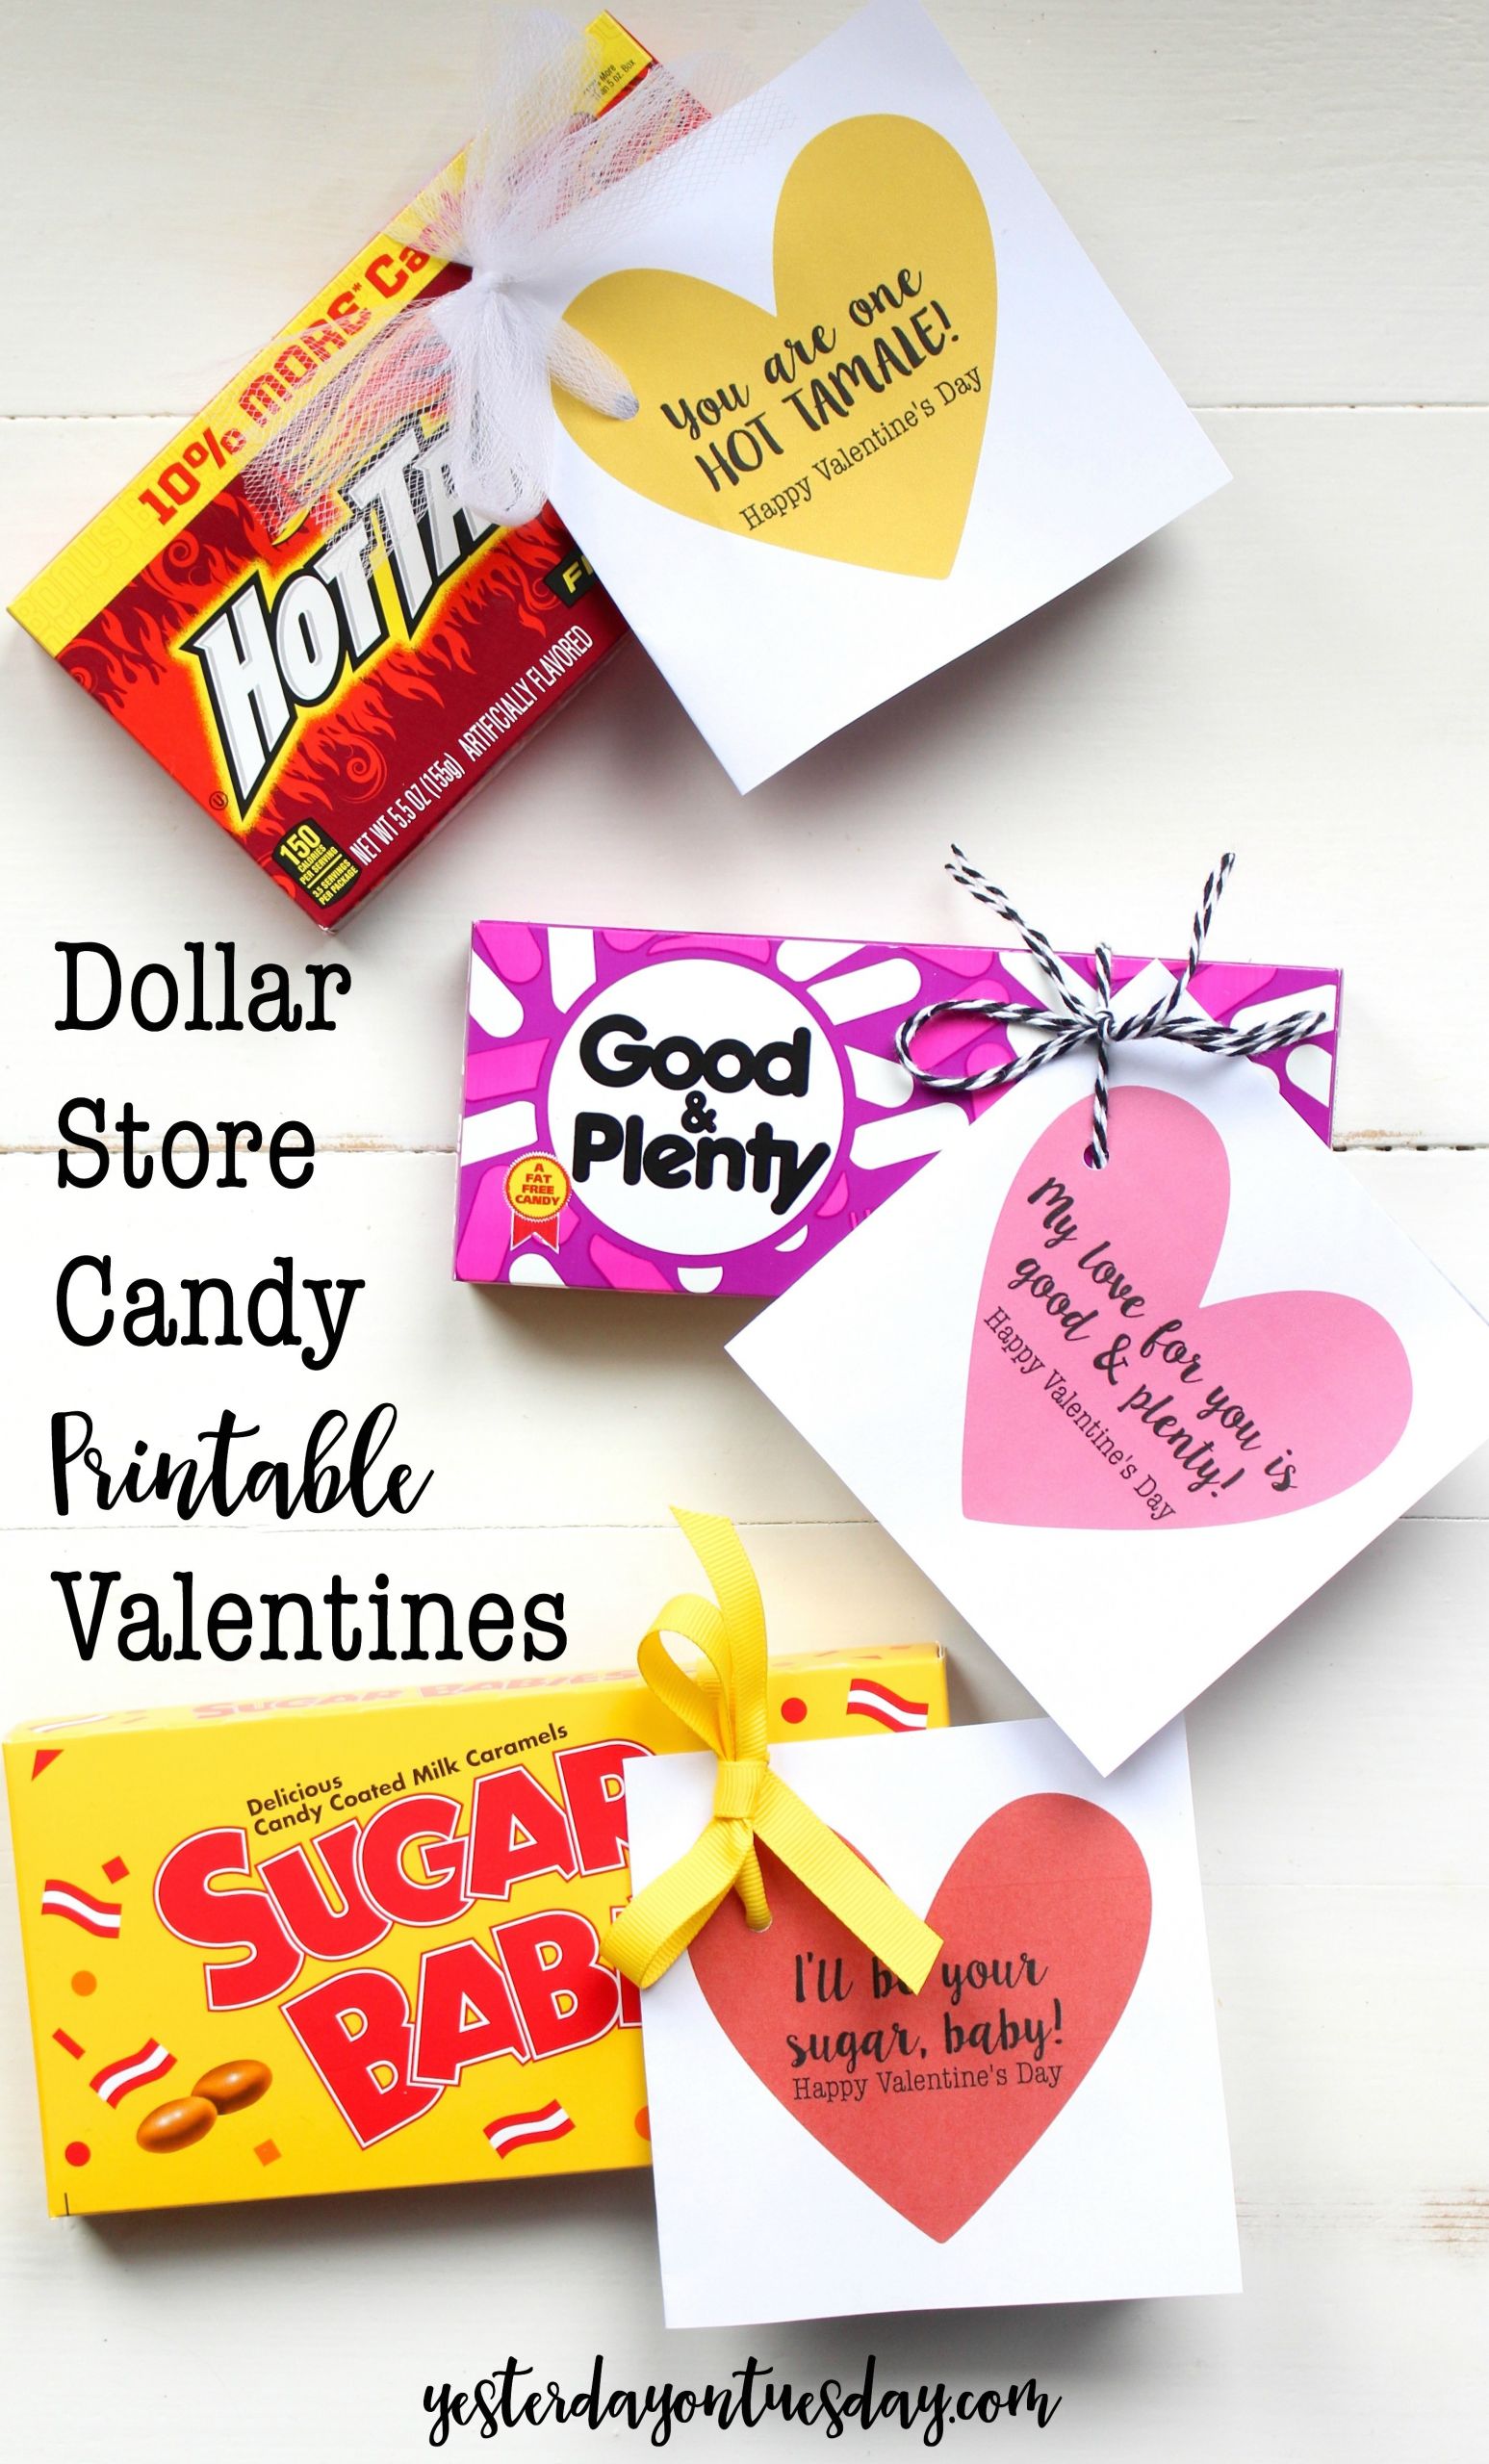 Candy Puns For Valentines Day
 Dollar Store Candy Printable Valentines